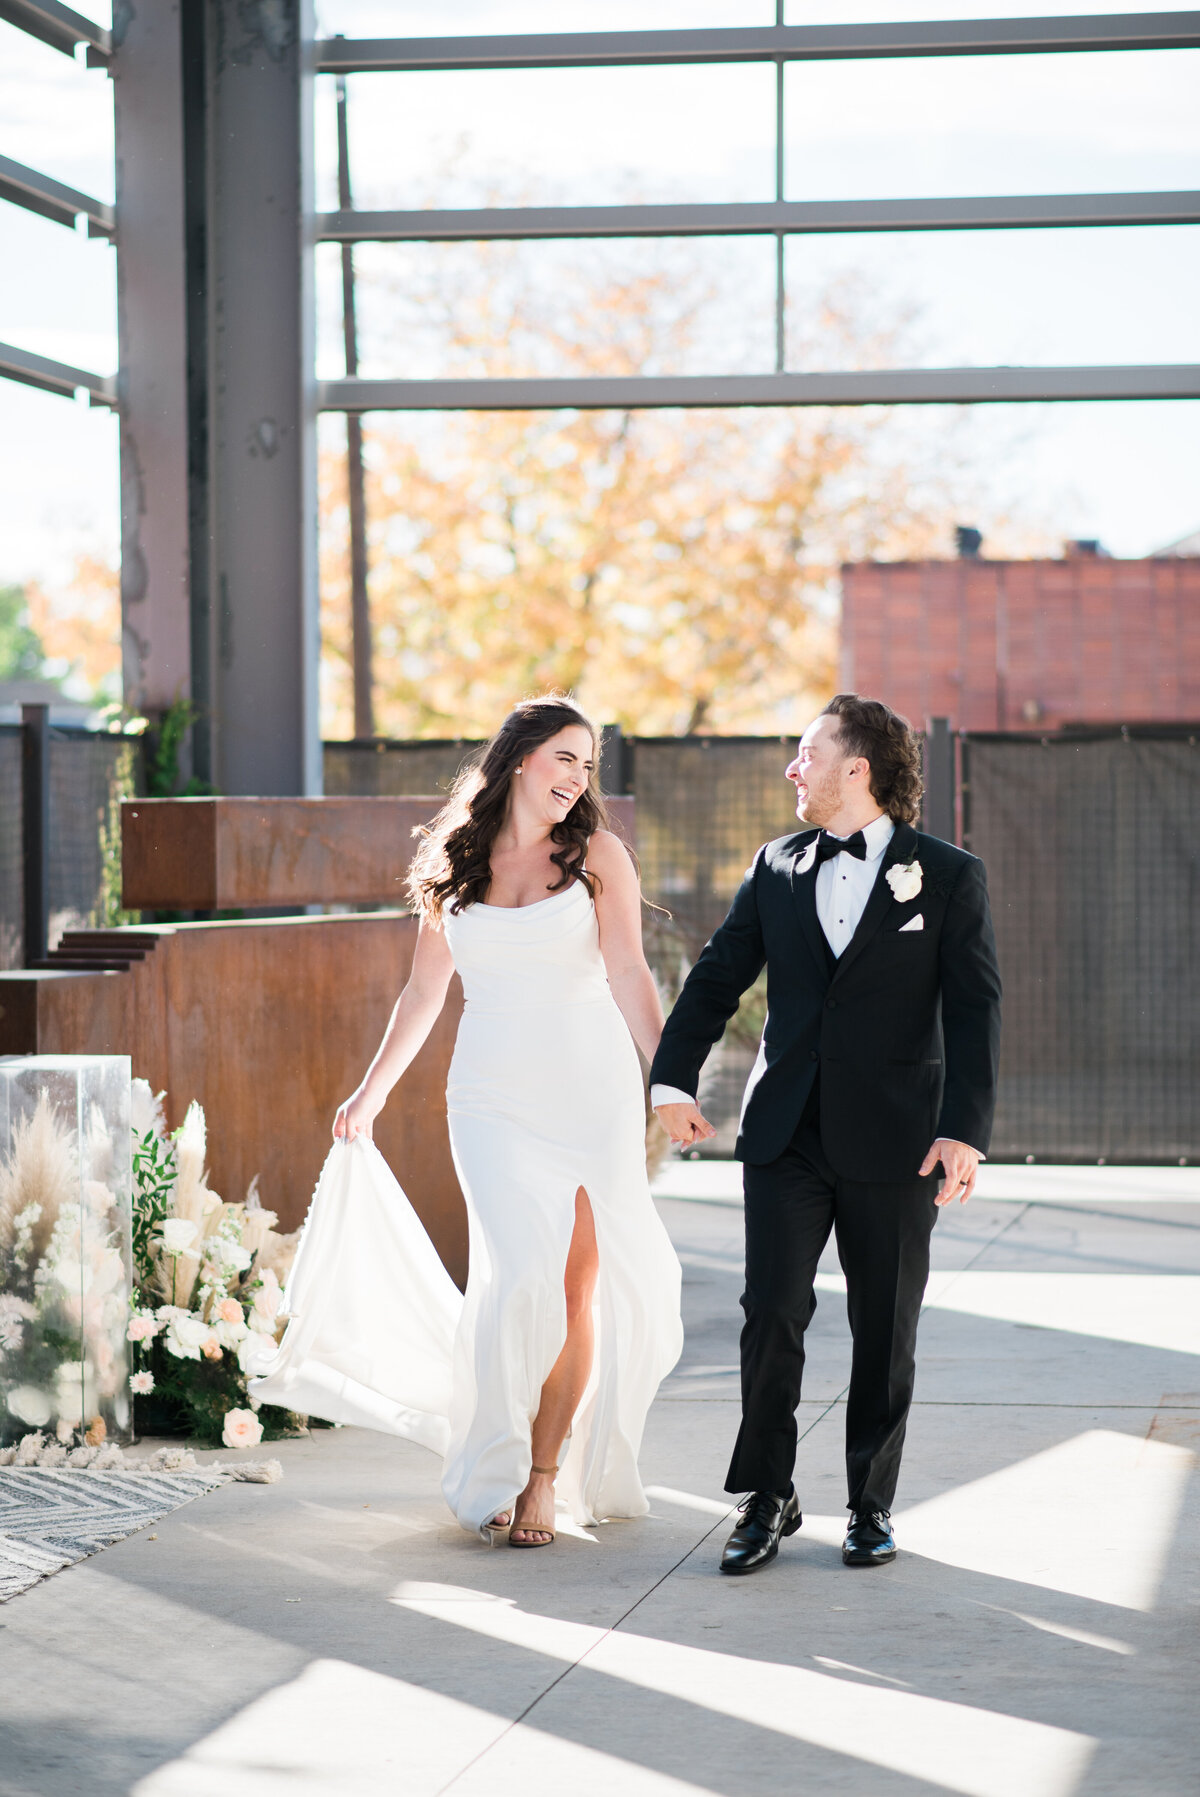 denver wedding photographer captures elegant wedding images of bride and groom holdin ghands as they walk through their urban colorado wedding venue with bride in a satin gown and groom in a tux